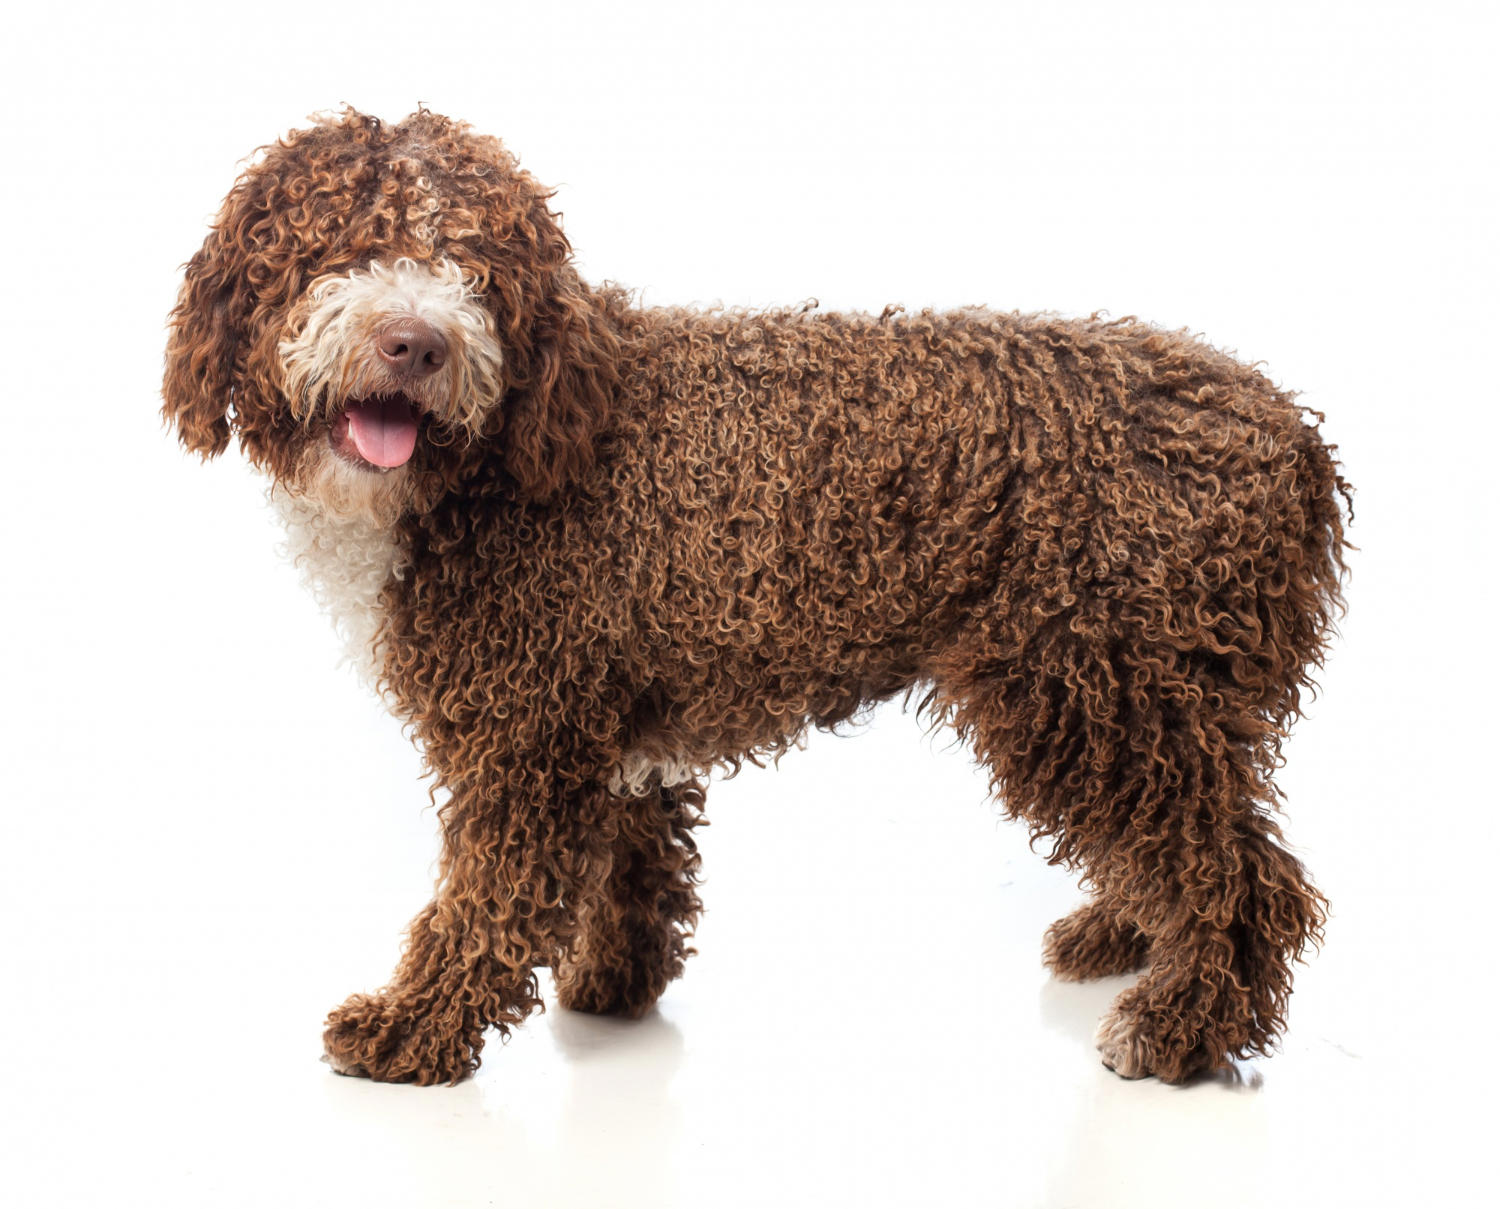 The Truth About Mini Goldendoodles: Are They Hypoallergenic?